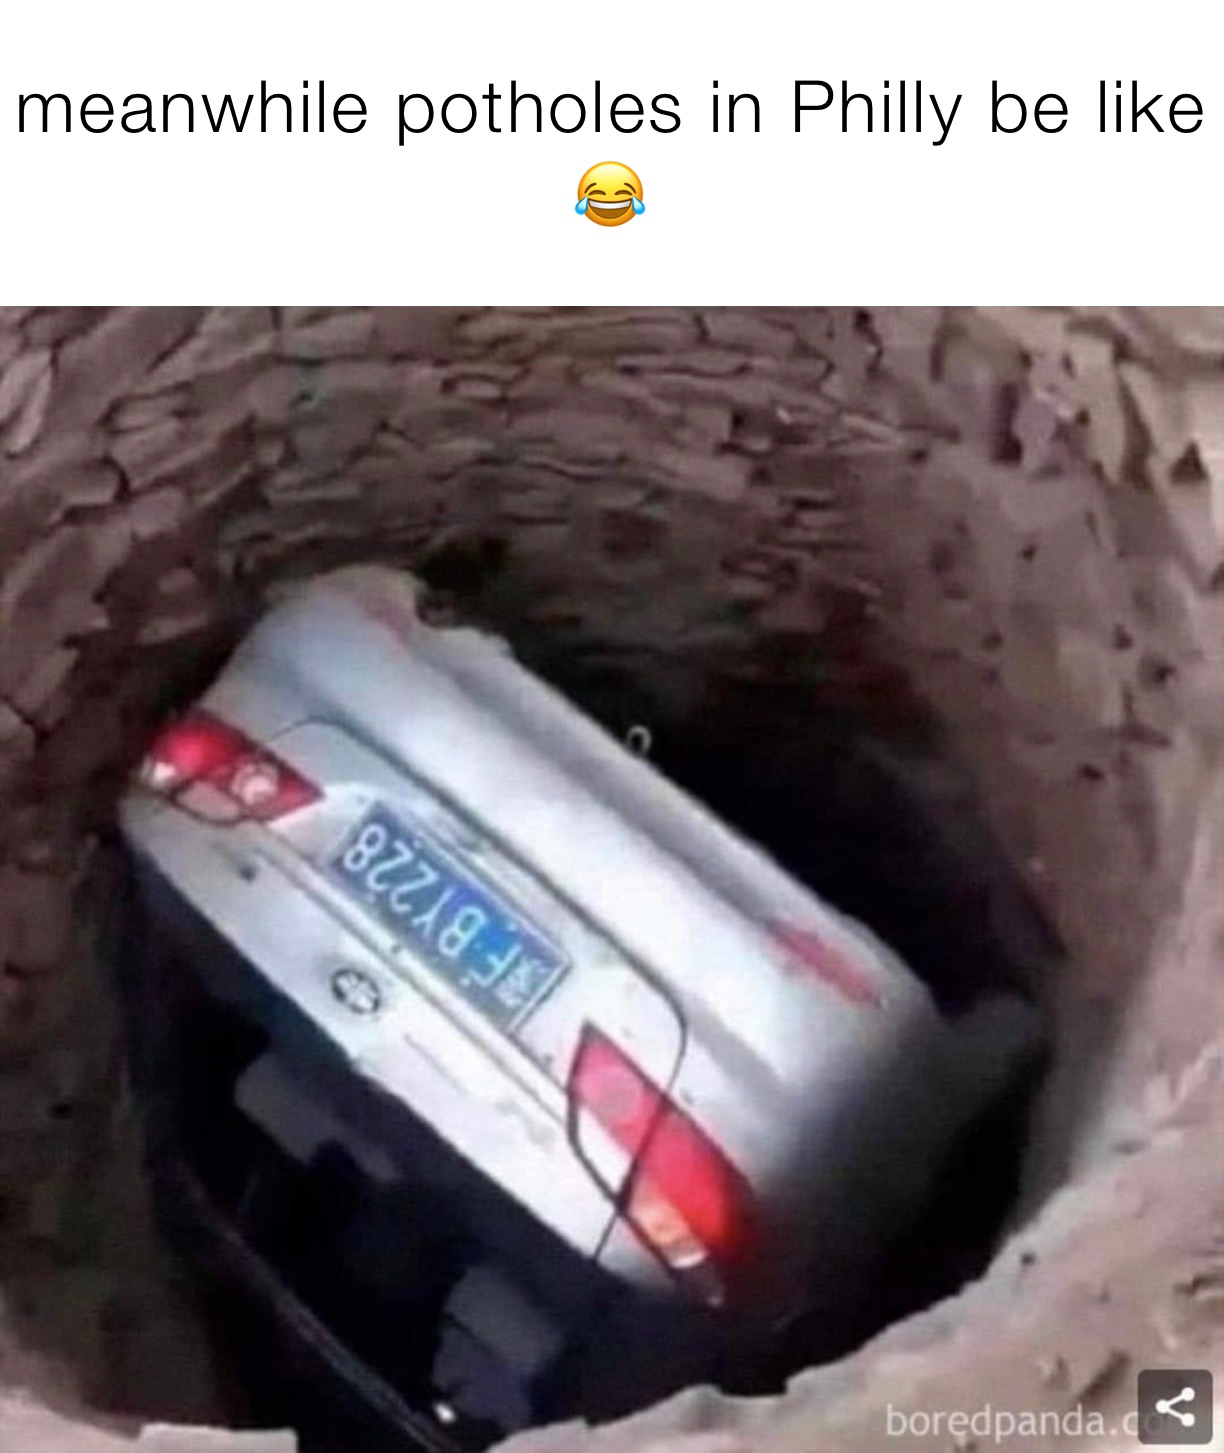 meanwhile potholes in Philly be like 😂